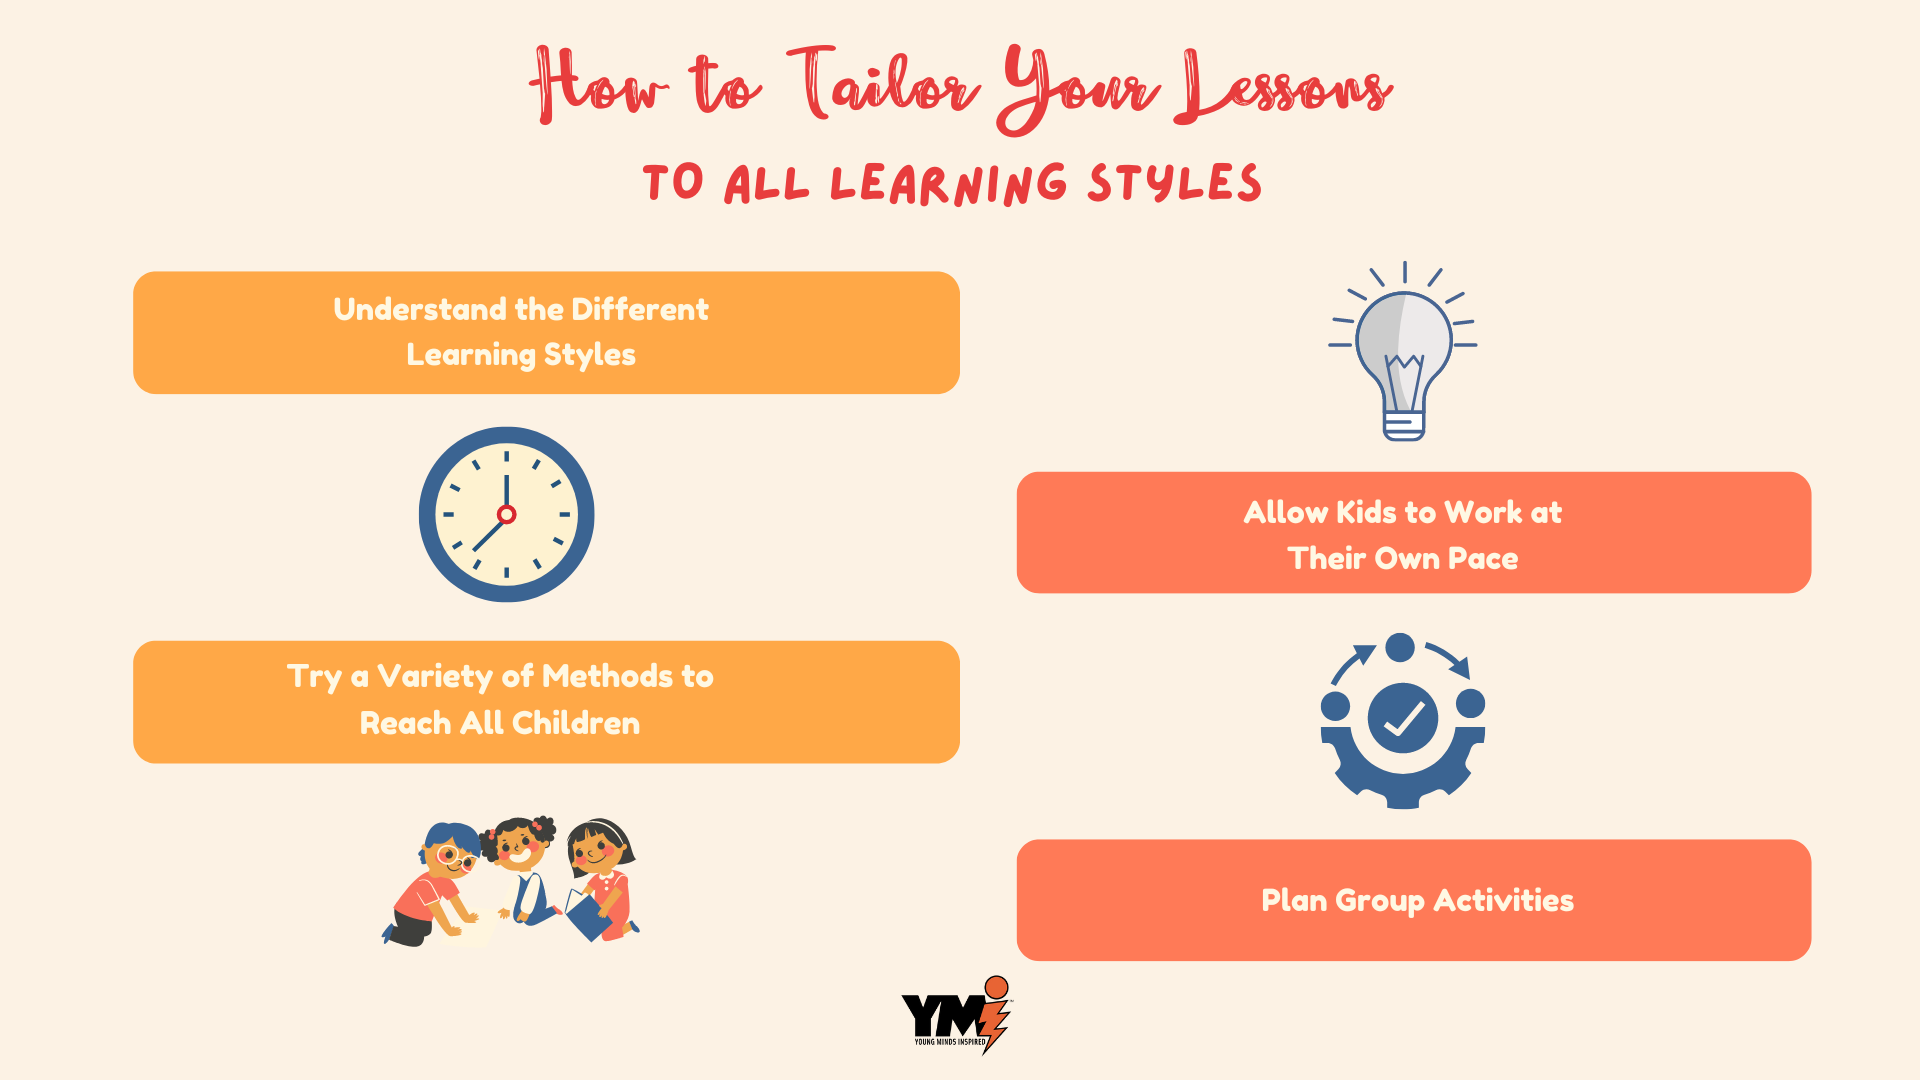 How To Tailor Your Lessons to All Learning Styles 